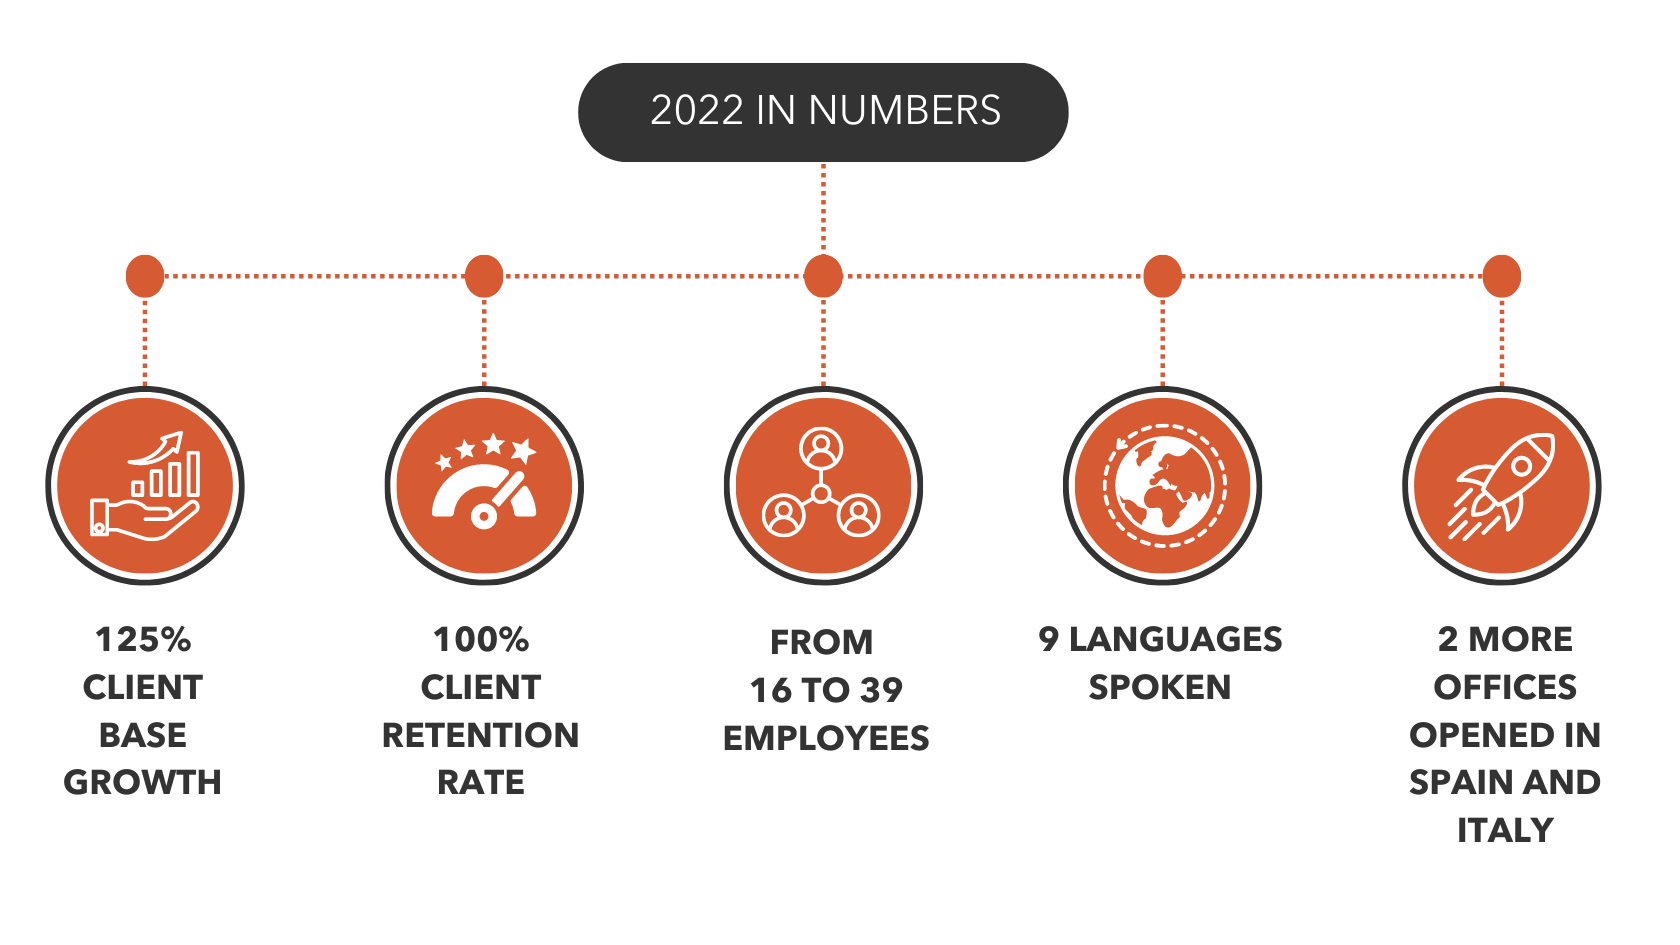 QuoIntelligence 2022 in numbers